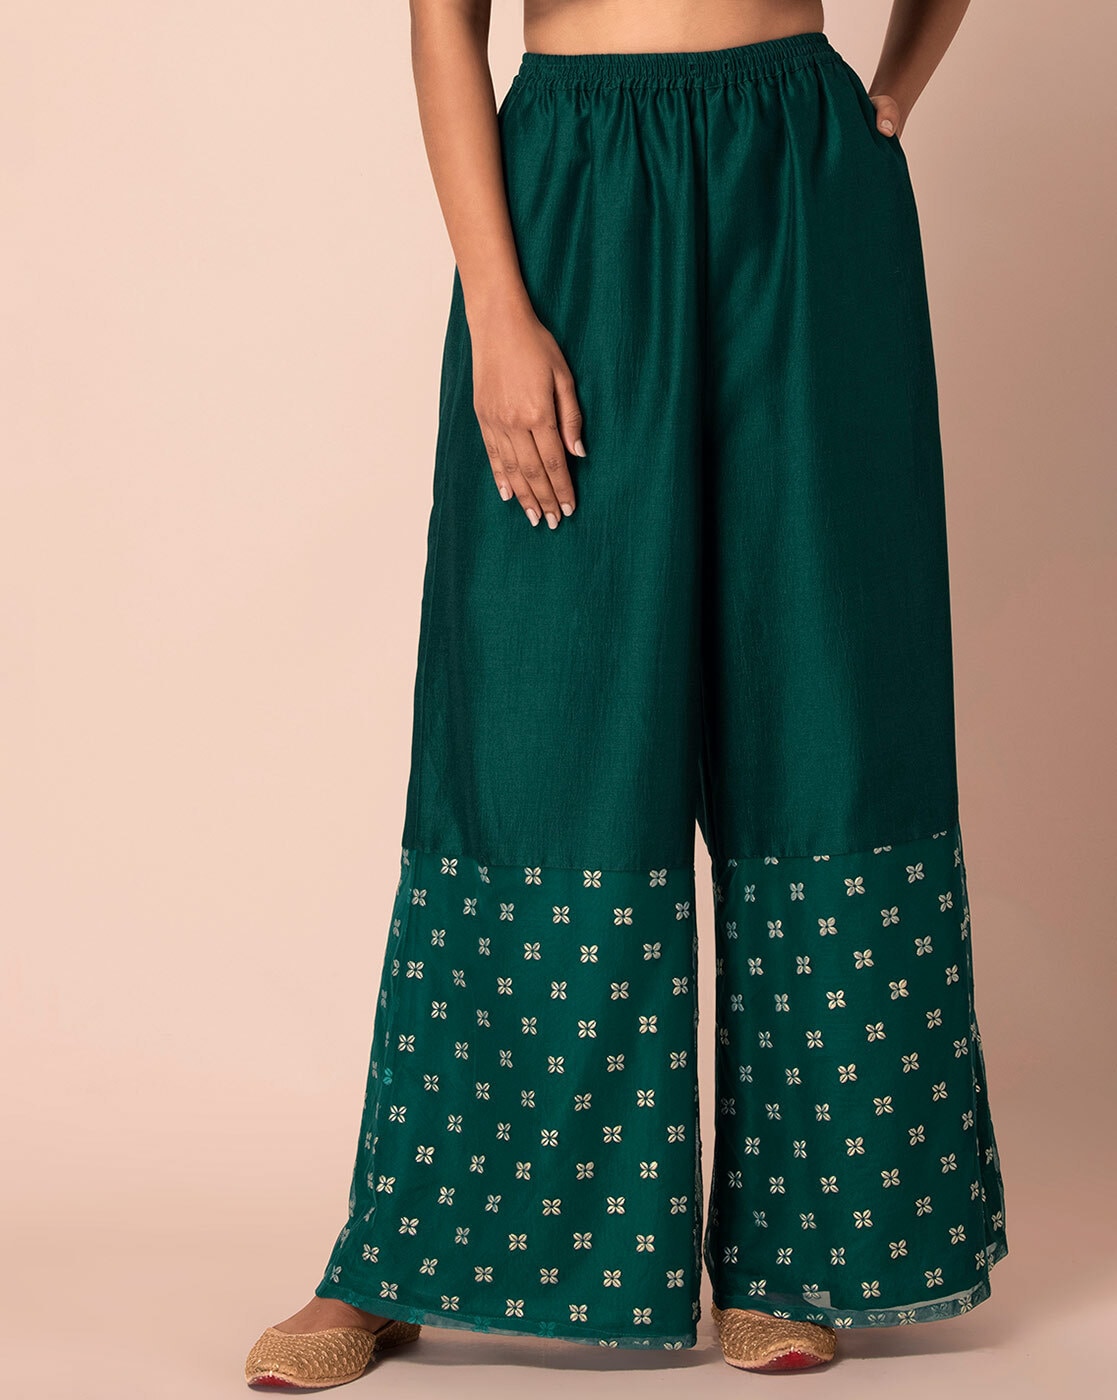 Aggregate more than 134 palazzo pants for women